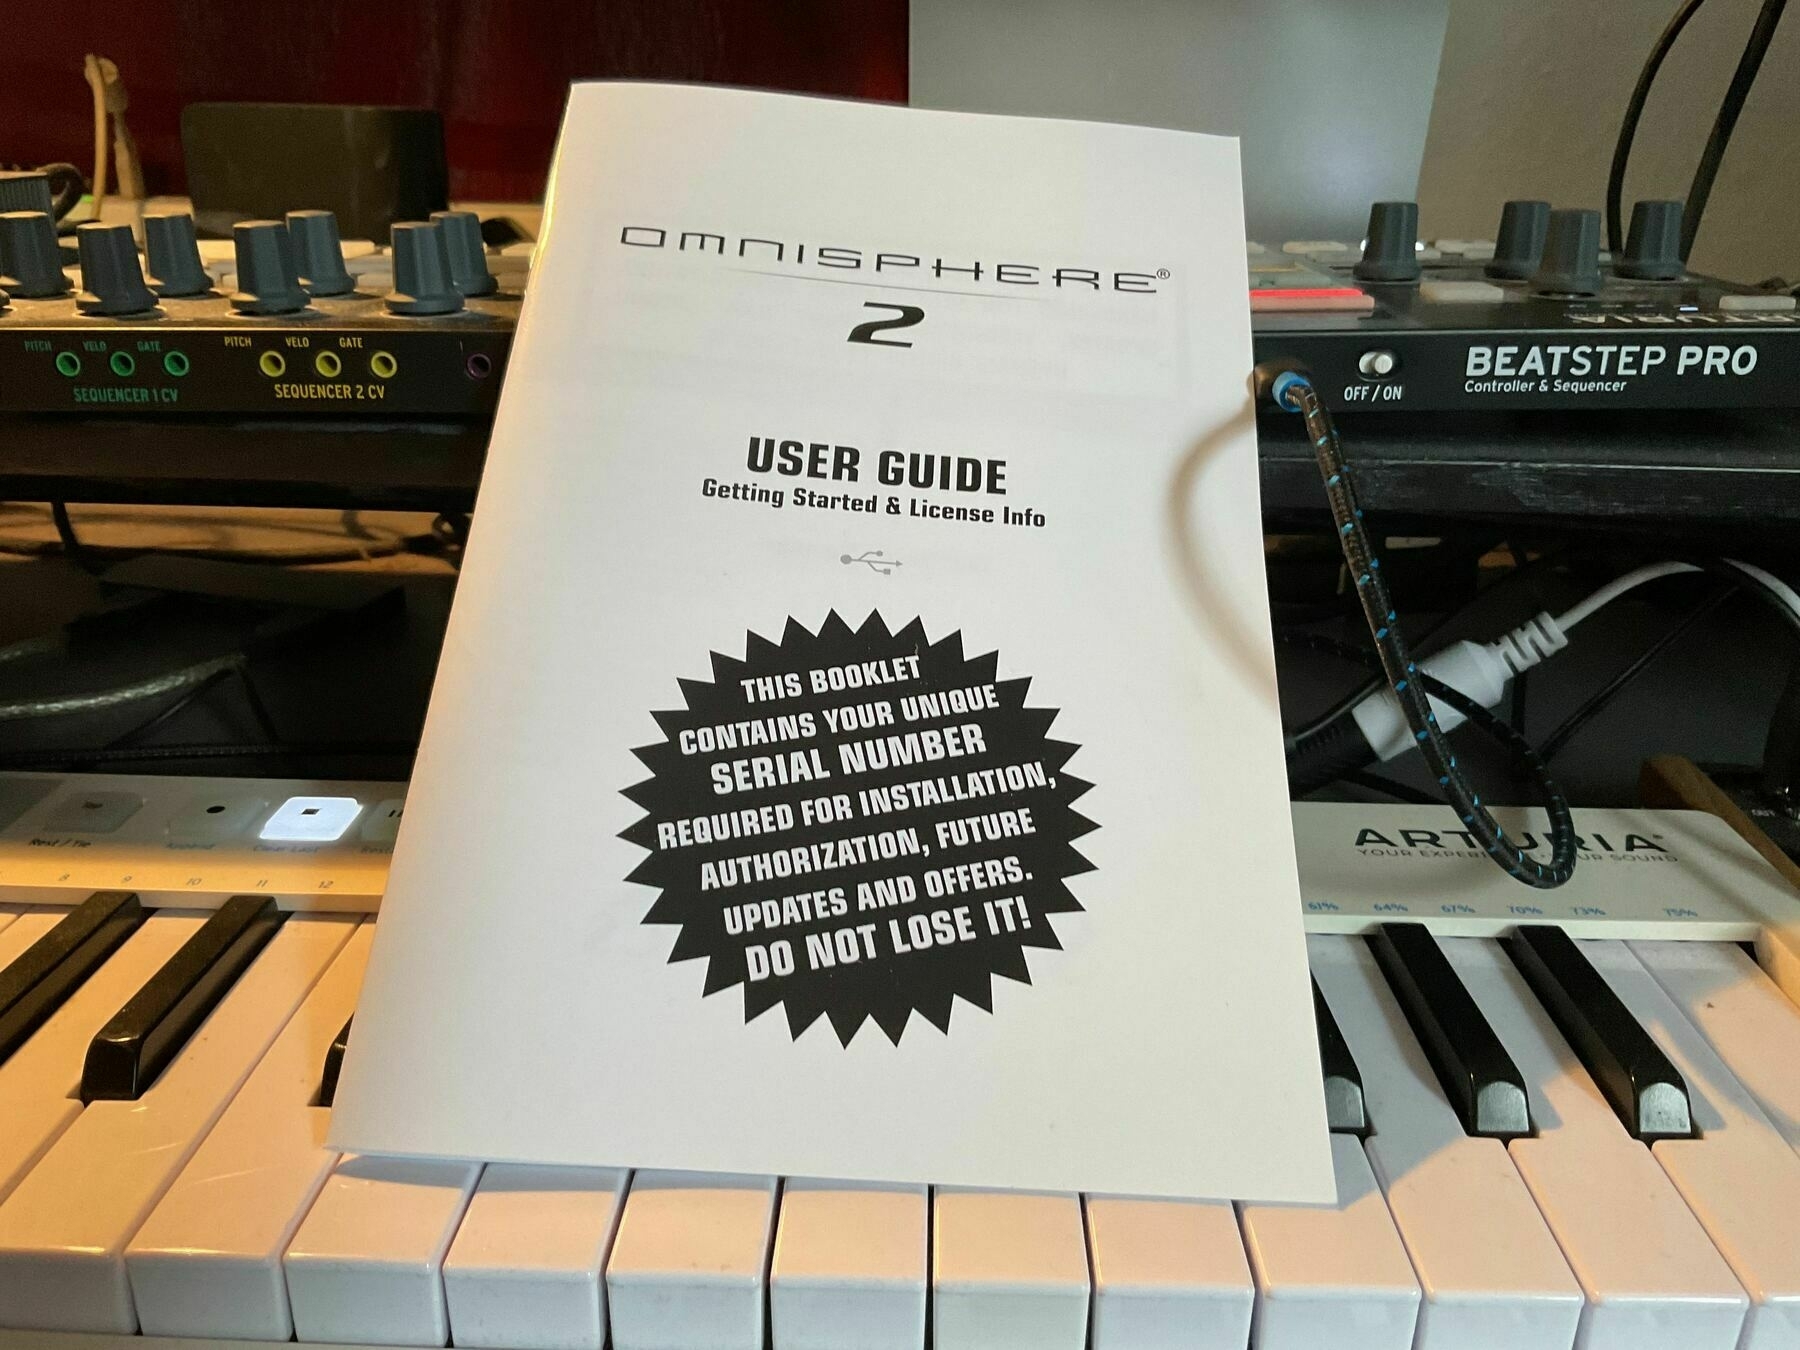 A user guide for installing music software resting on a piano keyboad.